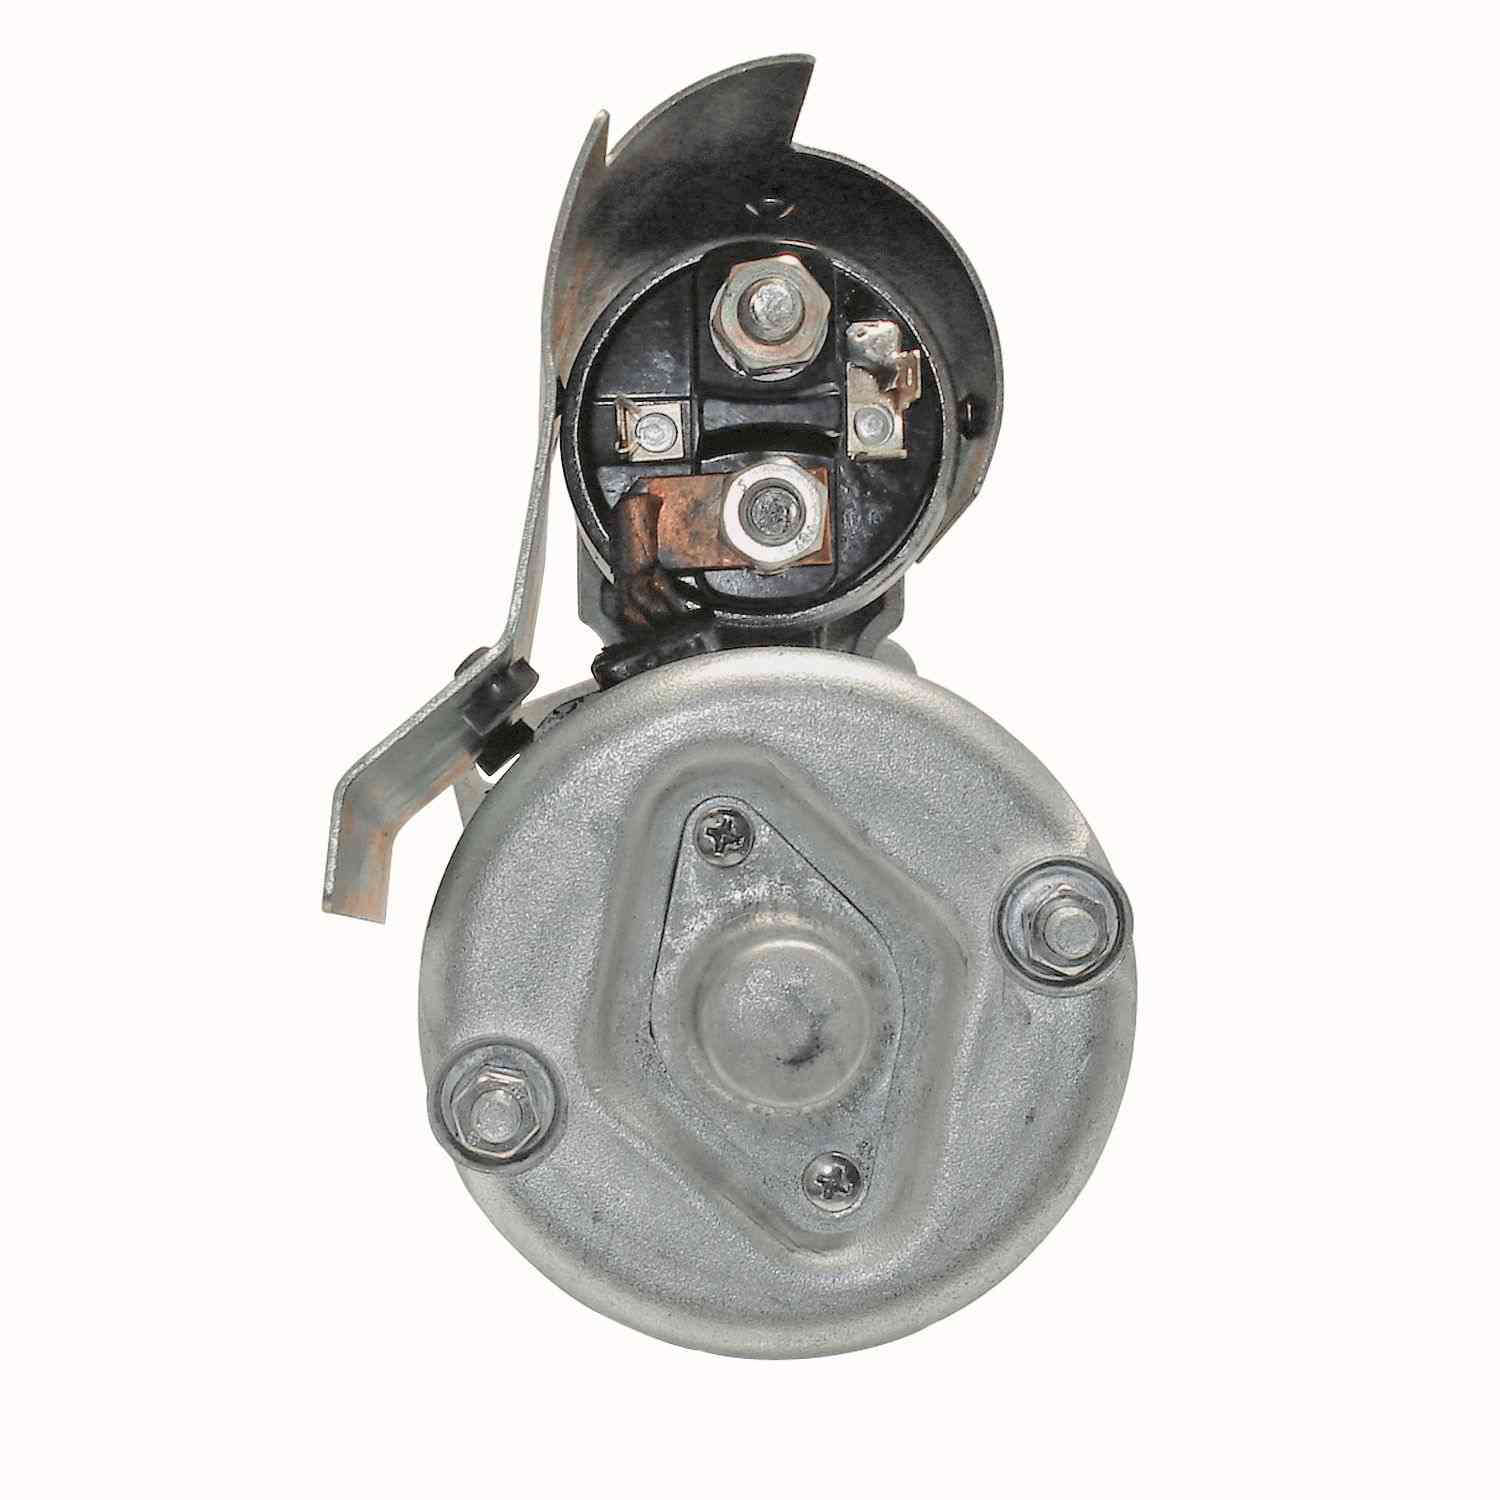 ACDELCO GOLD/PROFESSIONAL - Reman Starter Motor - DCC 336-1339